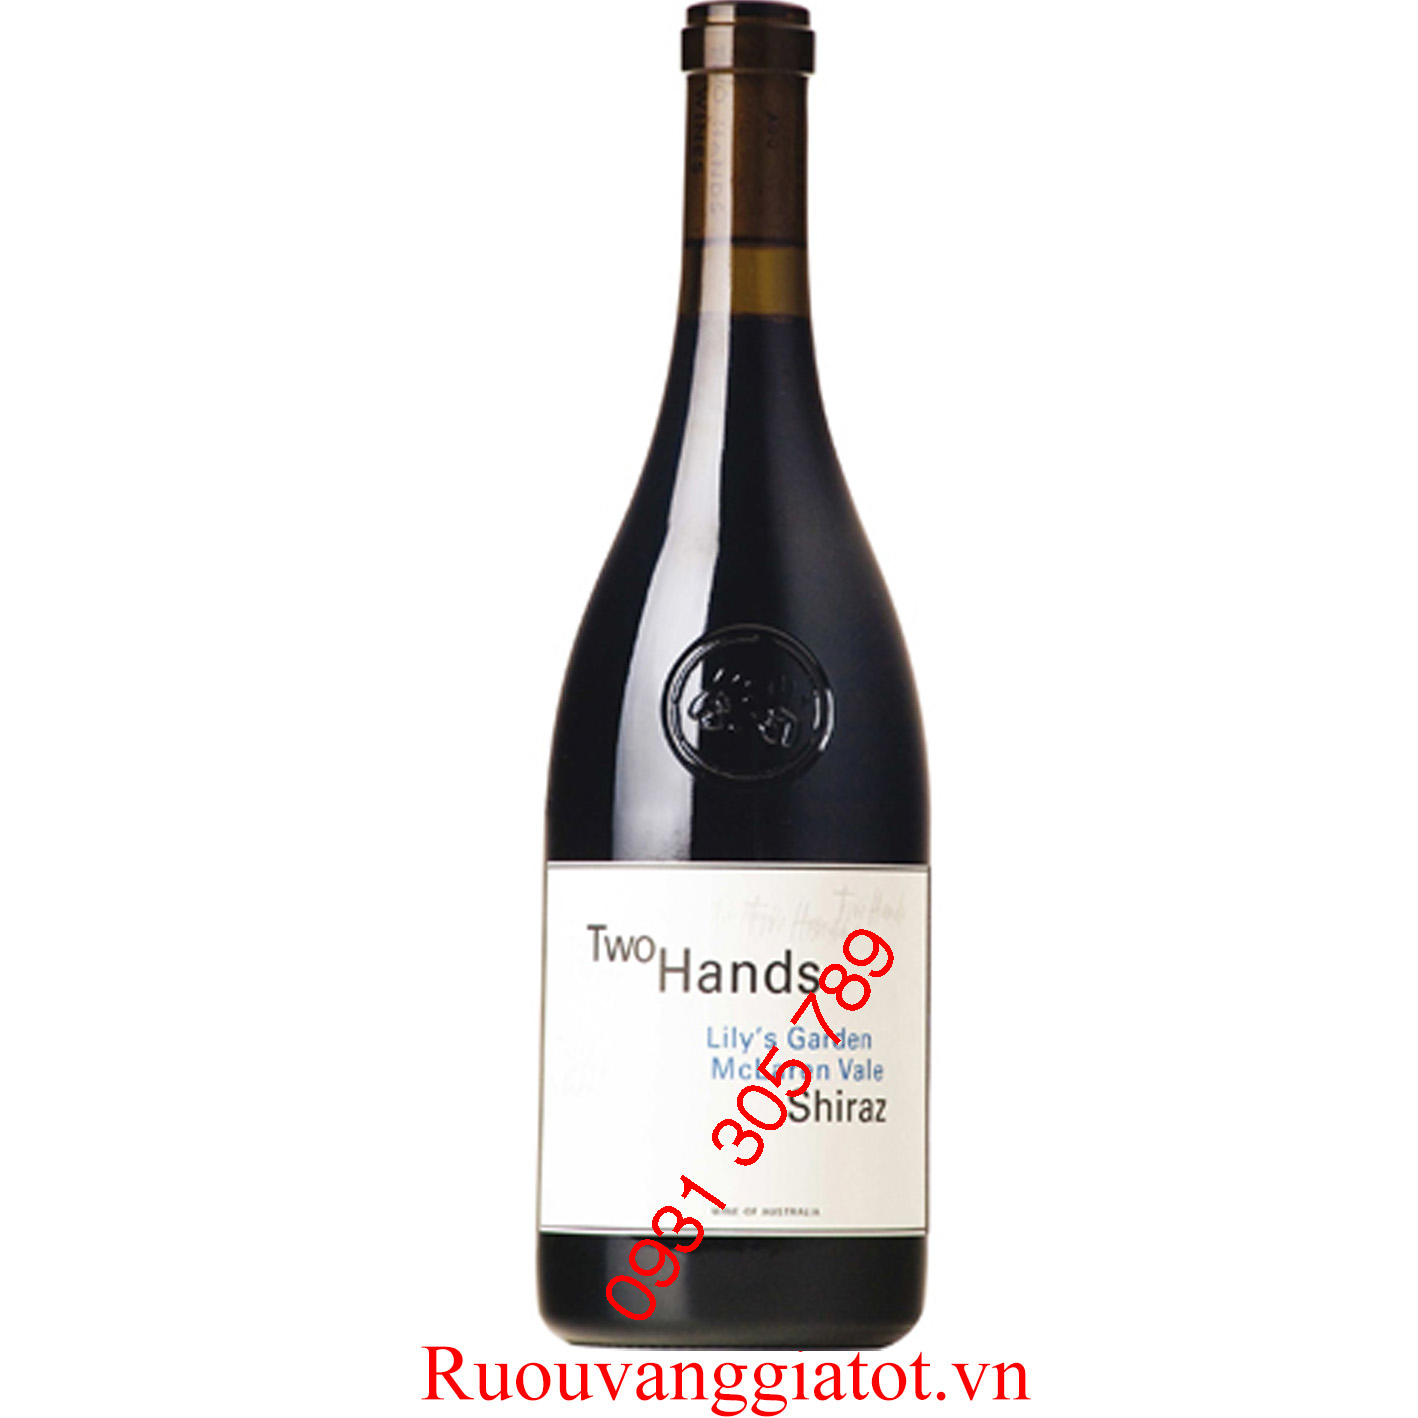 TWO HANDS LILY'S GARDEN Shiraz